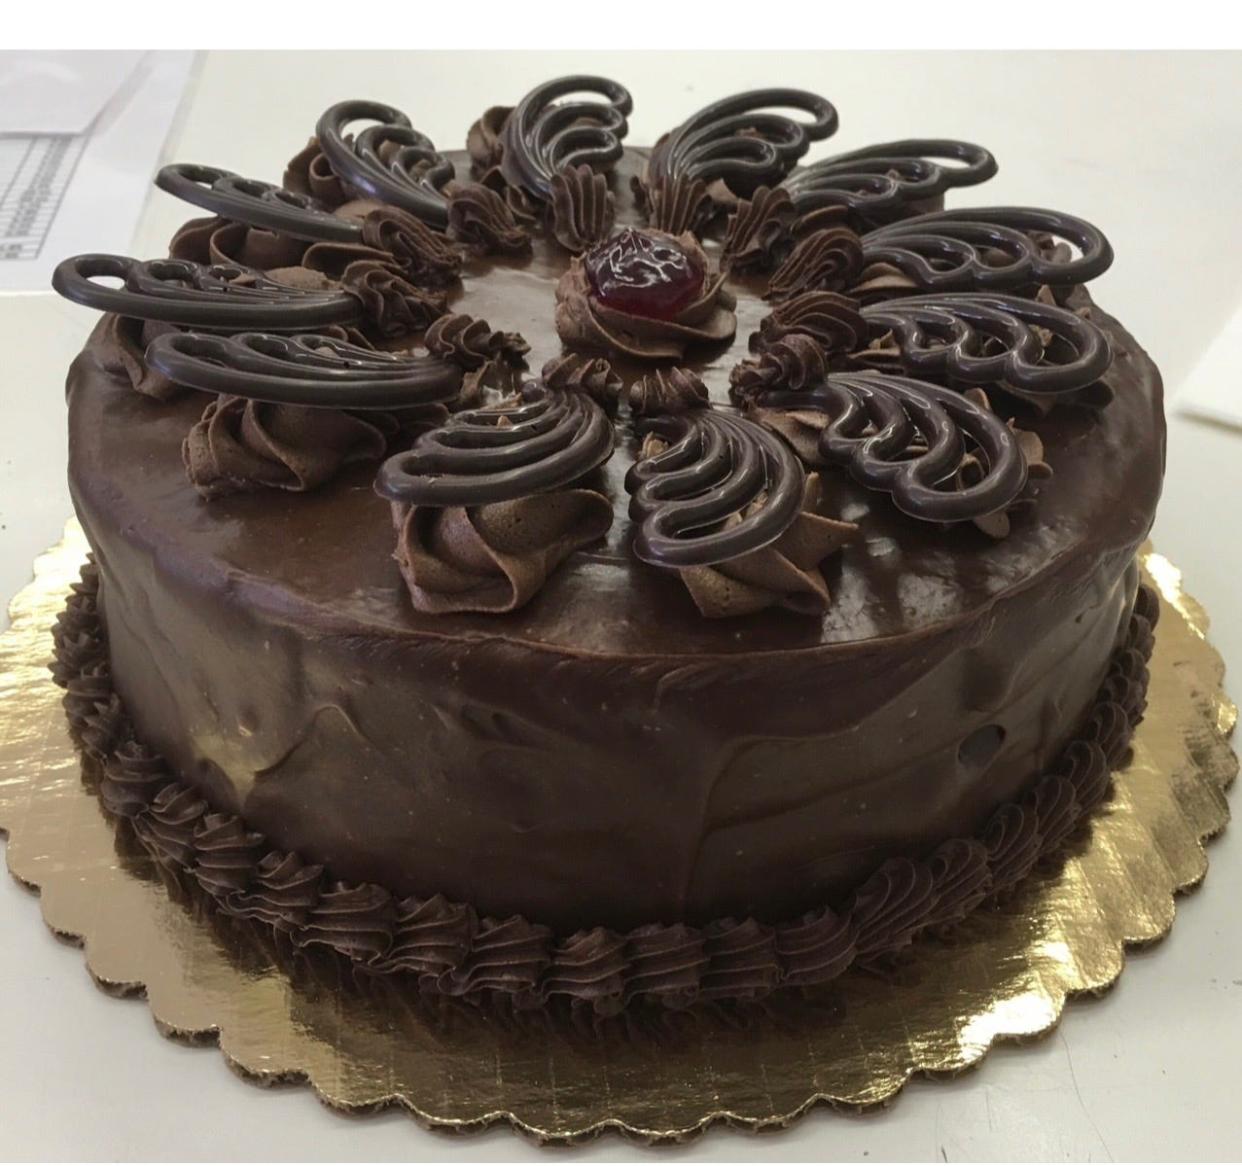 Elkhorn's Baker Meister offers a sacher torte for sale made by co-owner Gwendolyn Schuerstedt.